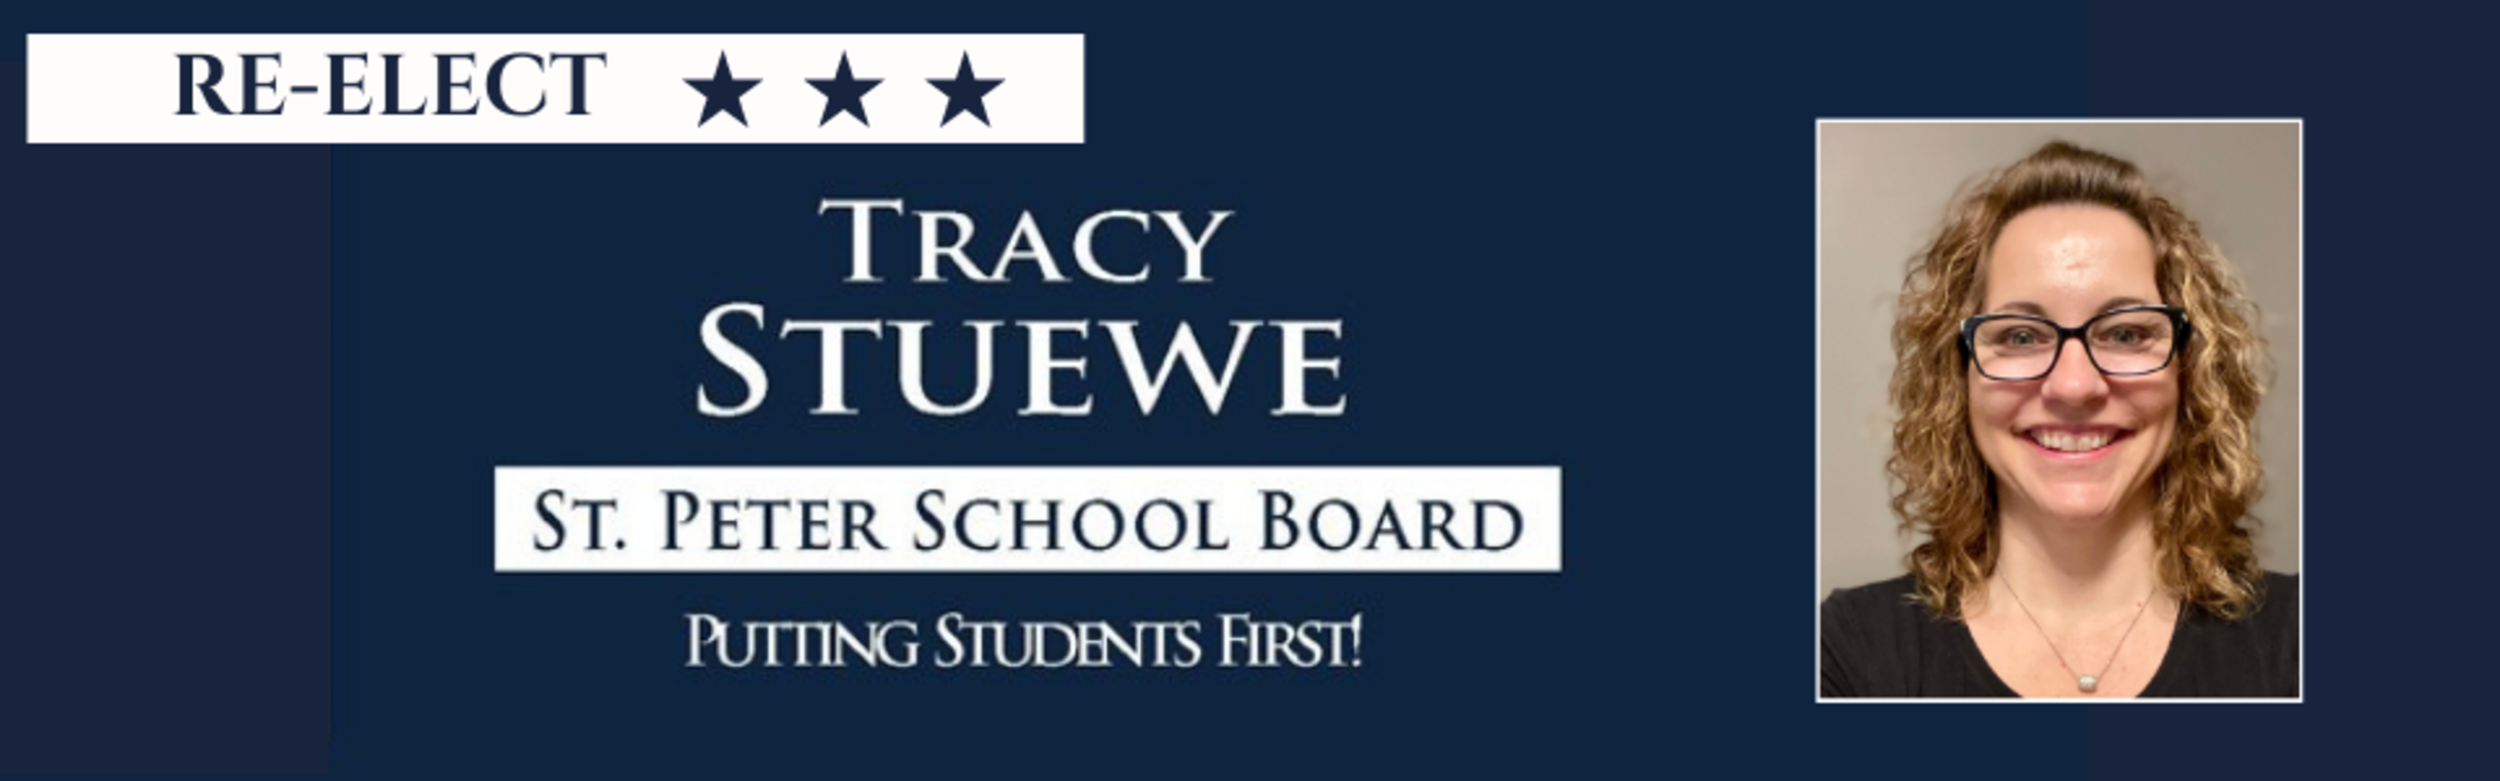 Tracy Stuewe - St Peter School Board - Putting Students First!